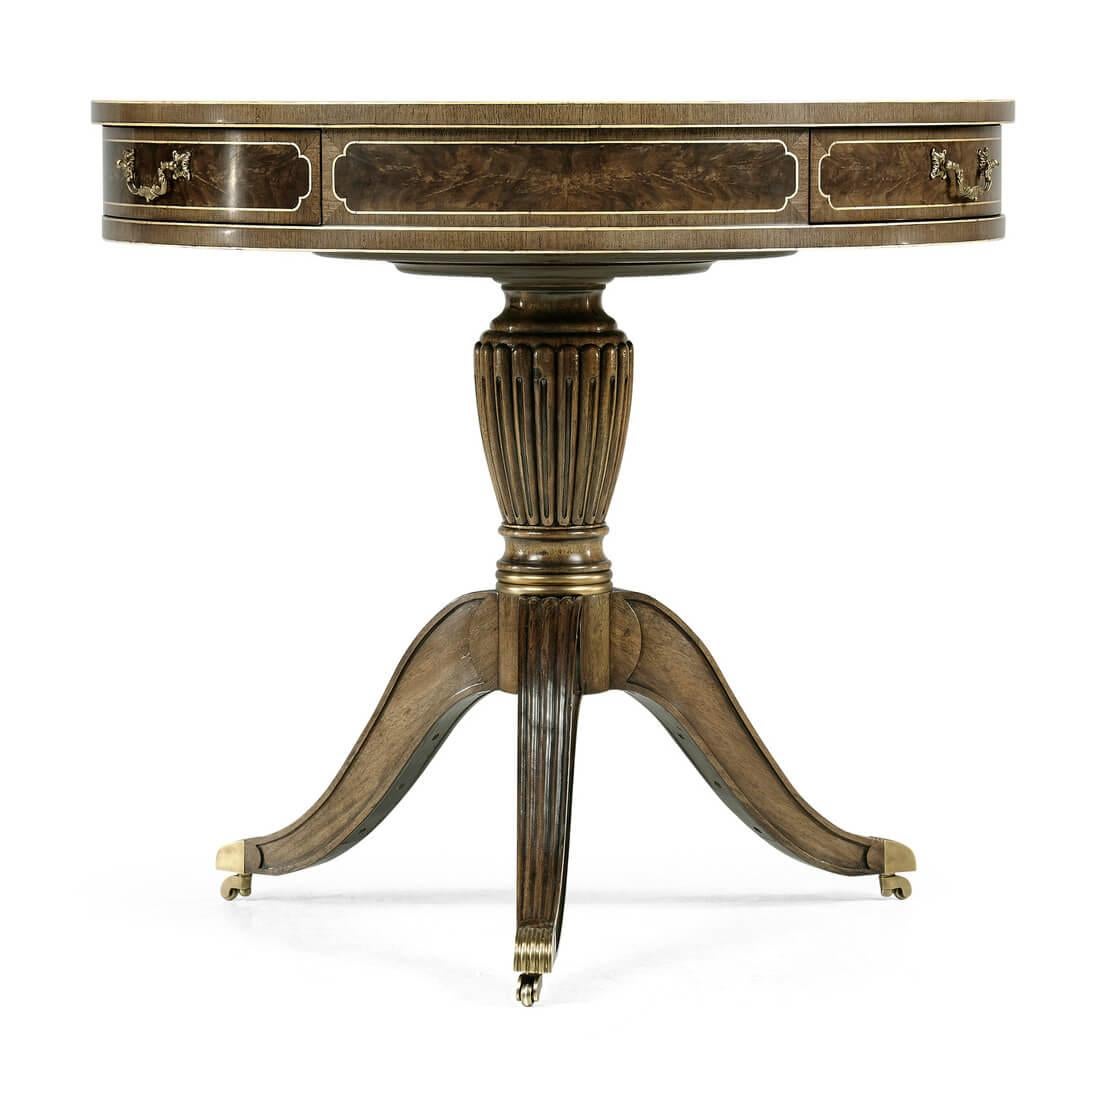 English Regency style bleached mahogany drum table with a tooled leather inset top, figured crotch mahogany-paneled cross banding with three frieze drawers each with brass handles above a reeded pedestal with three splay reeded legs raised on brass